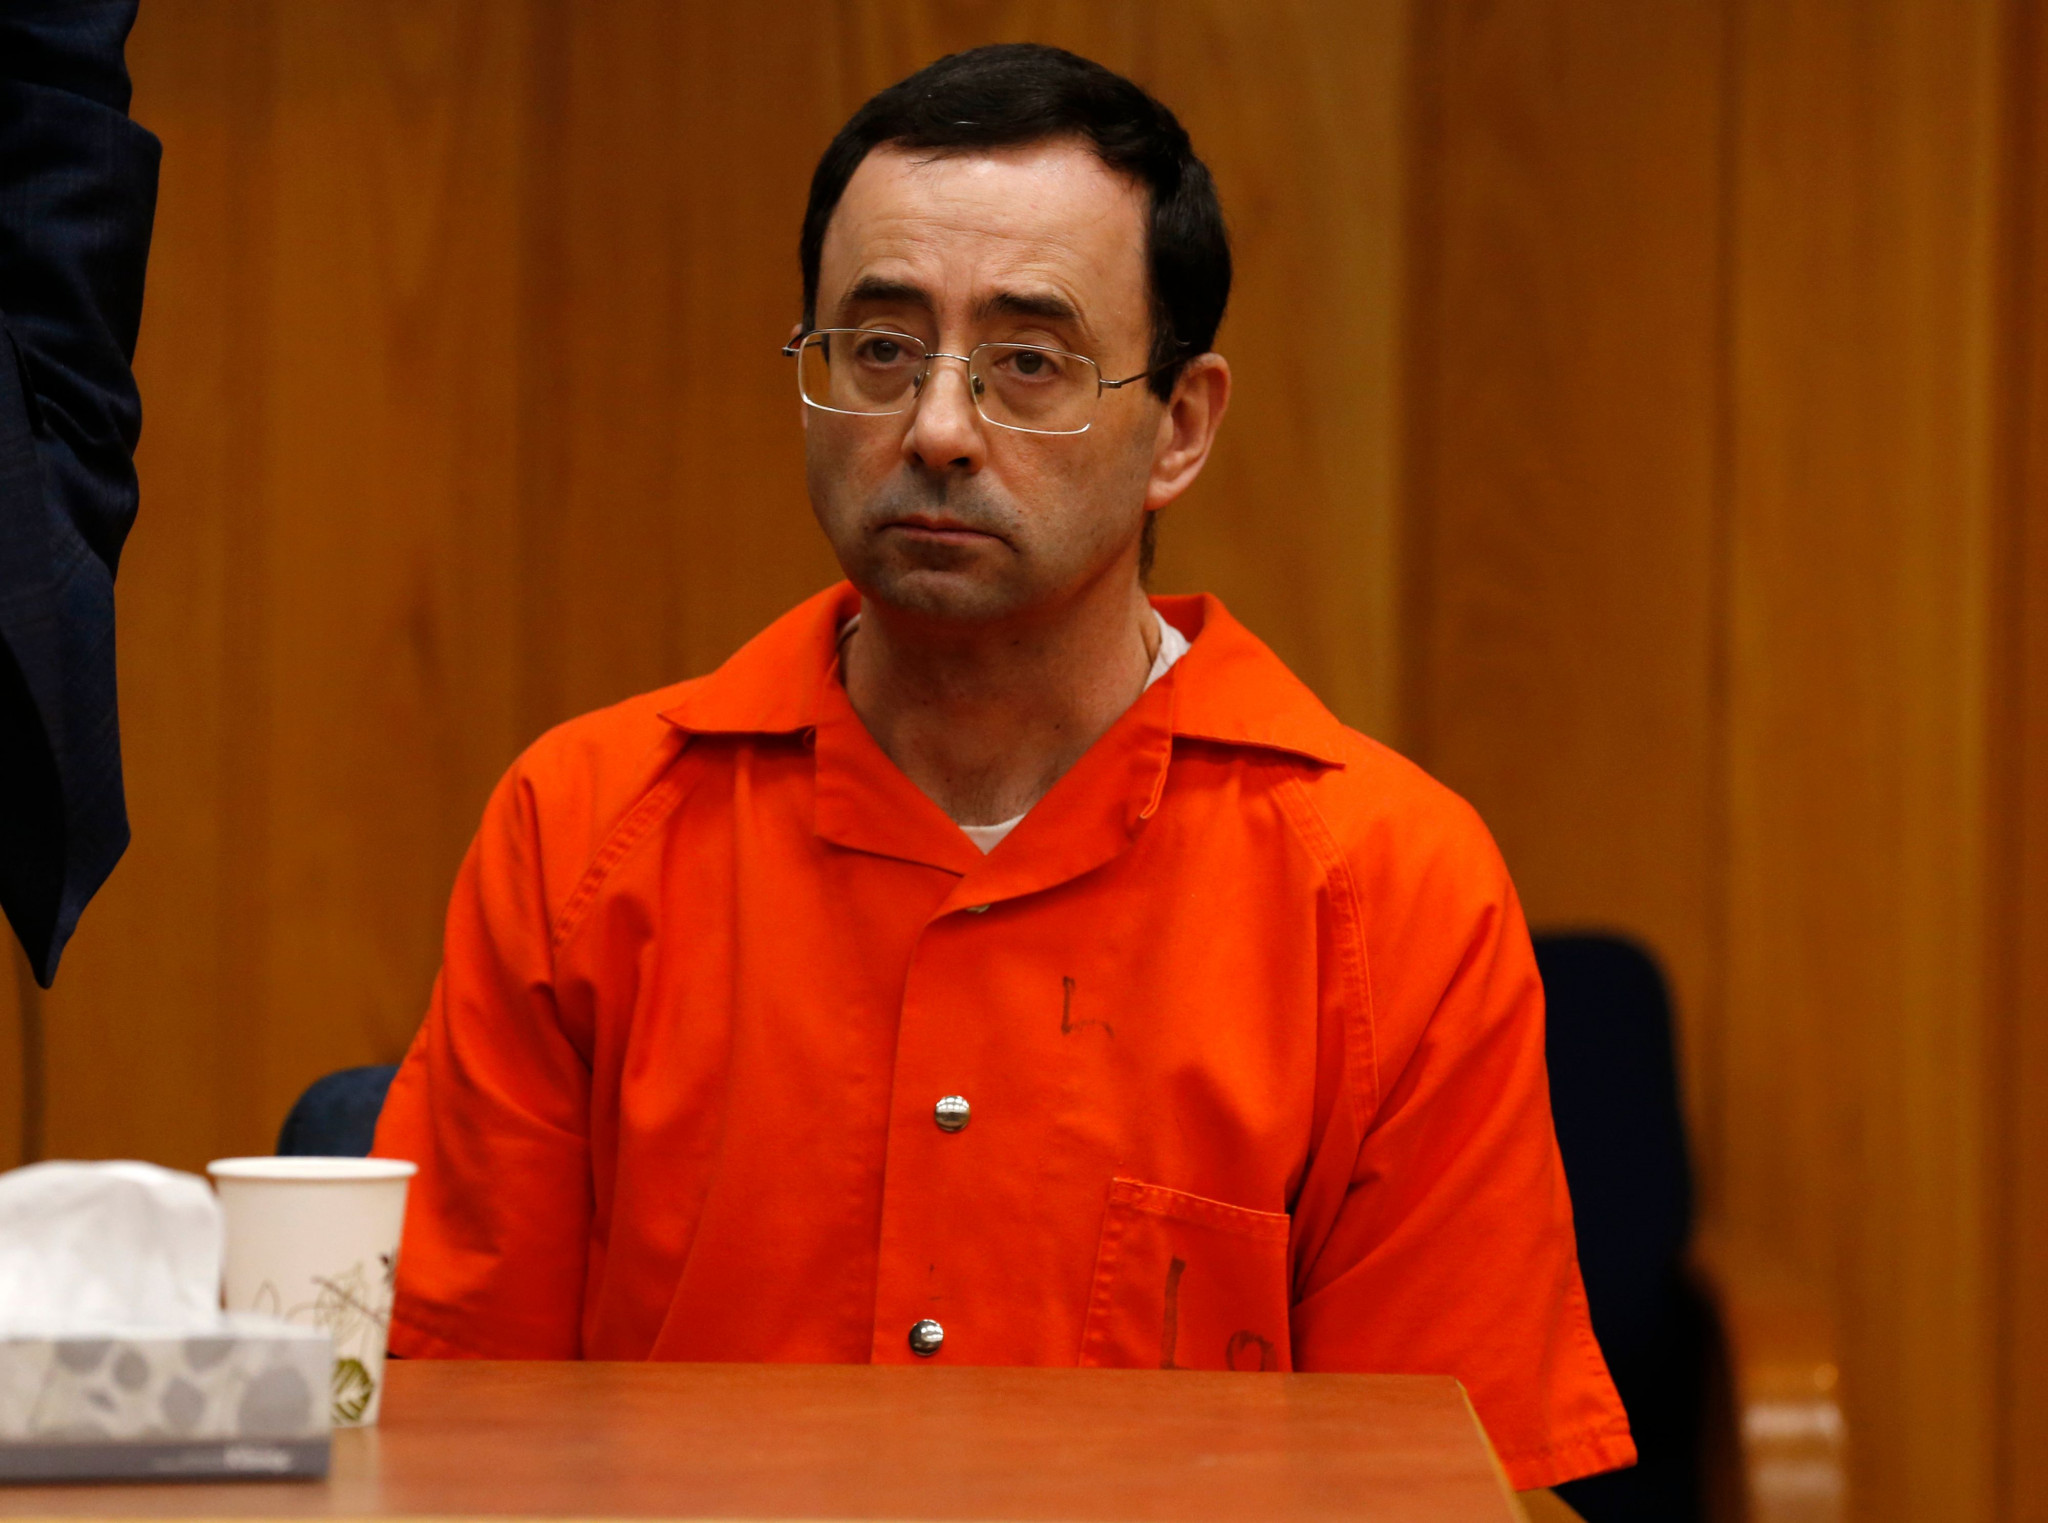 The entire USA Gymnastics Board has submitted their resignations following the Larry Nassar scandal ©Getty Images 